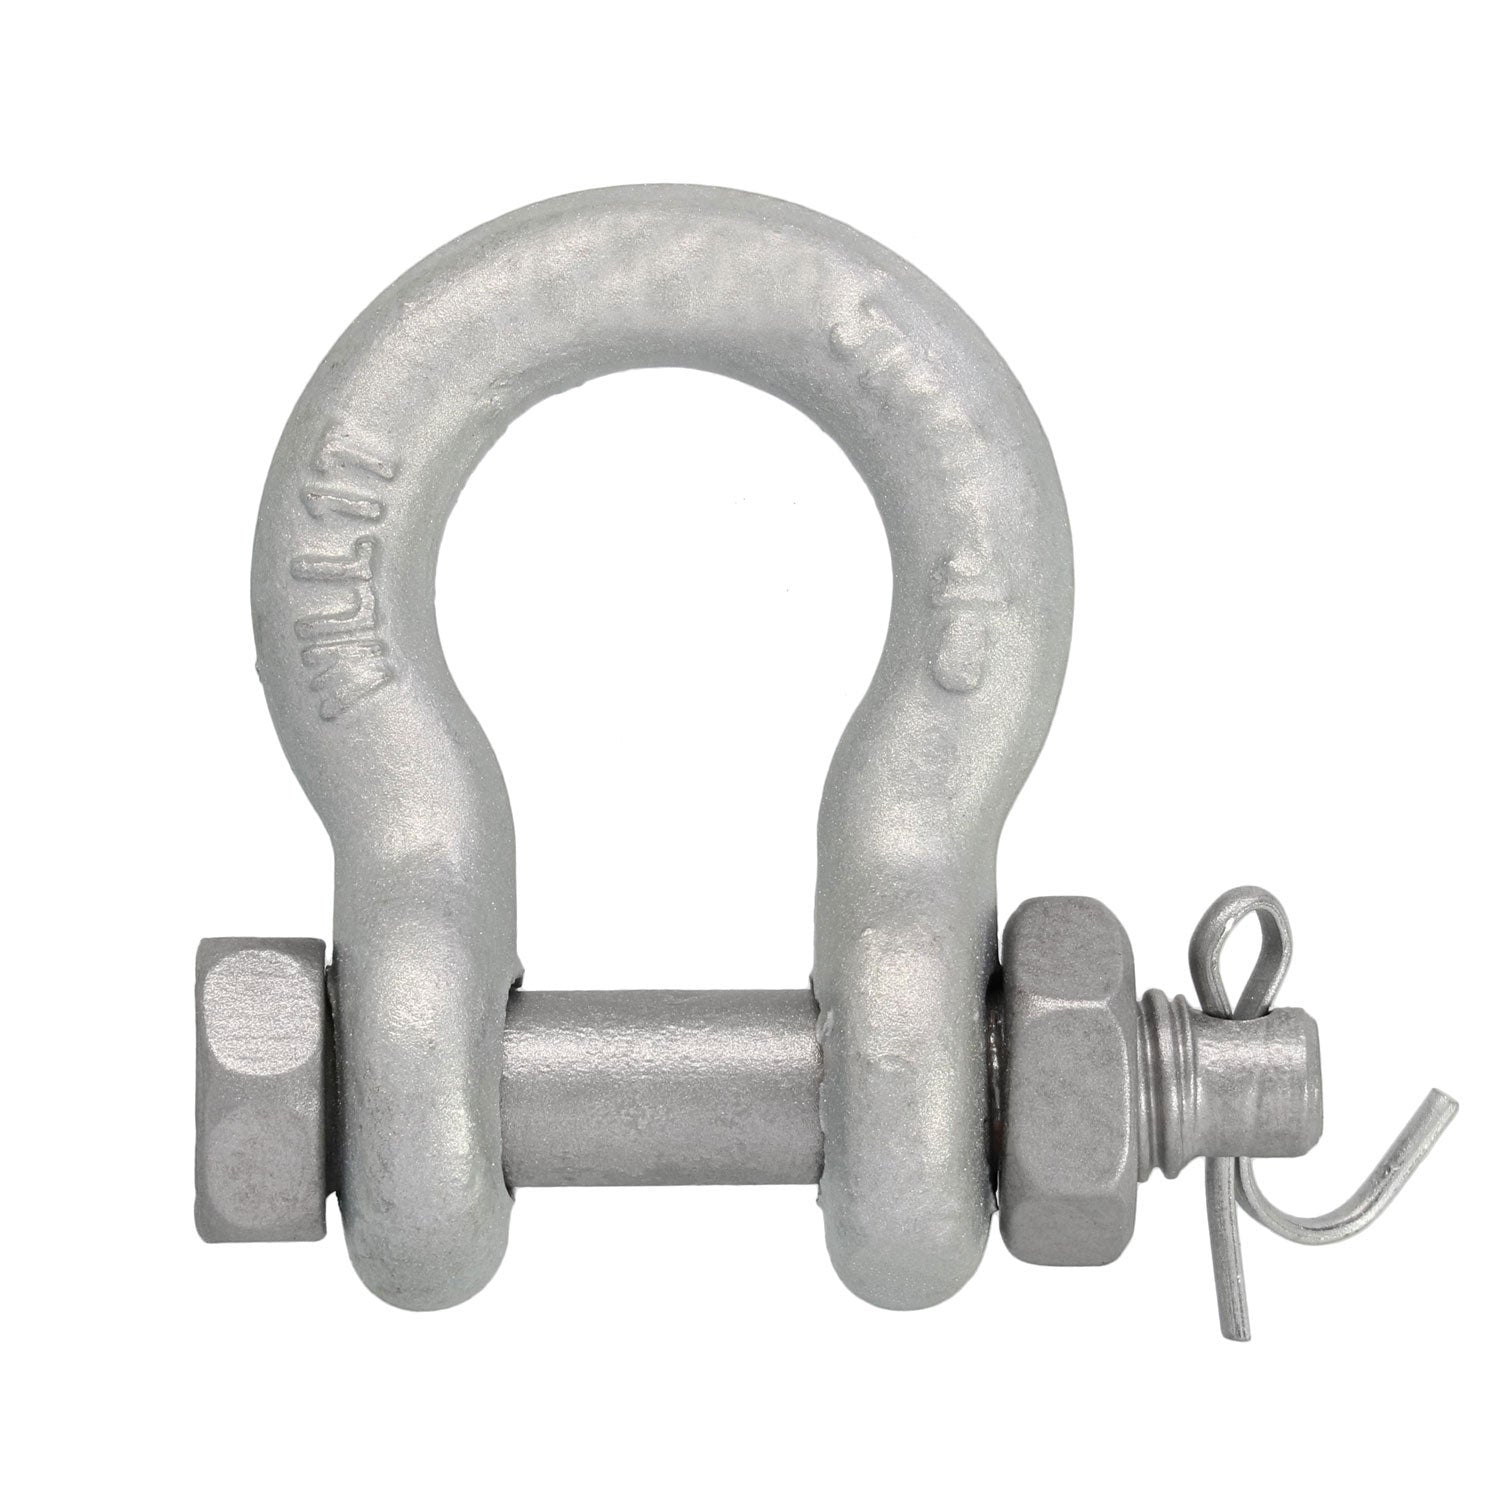 3/4 Ton Load Limit 4x 5/16" Super Strong Anchor Shackle W/Galvanized Screw Pin 